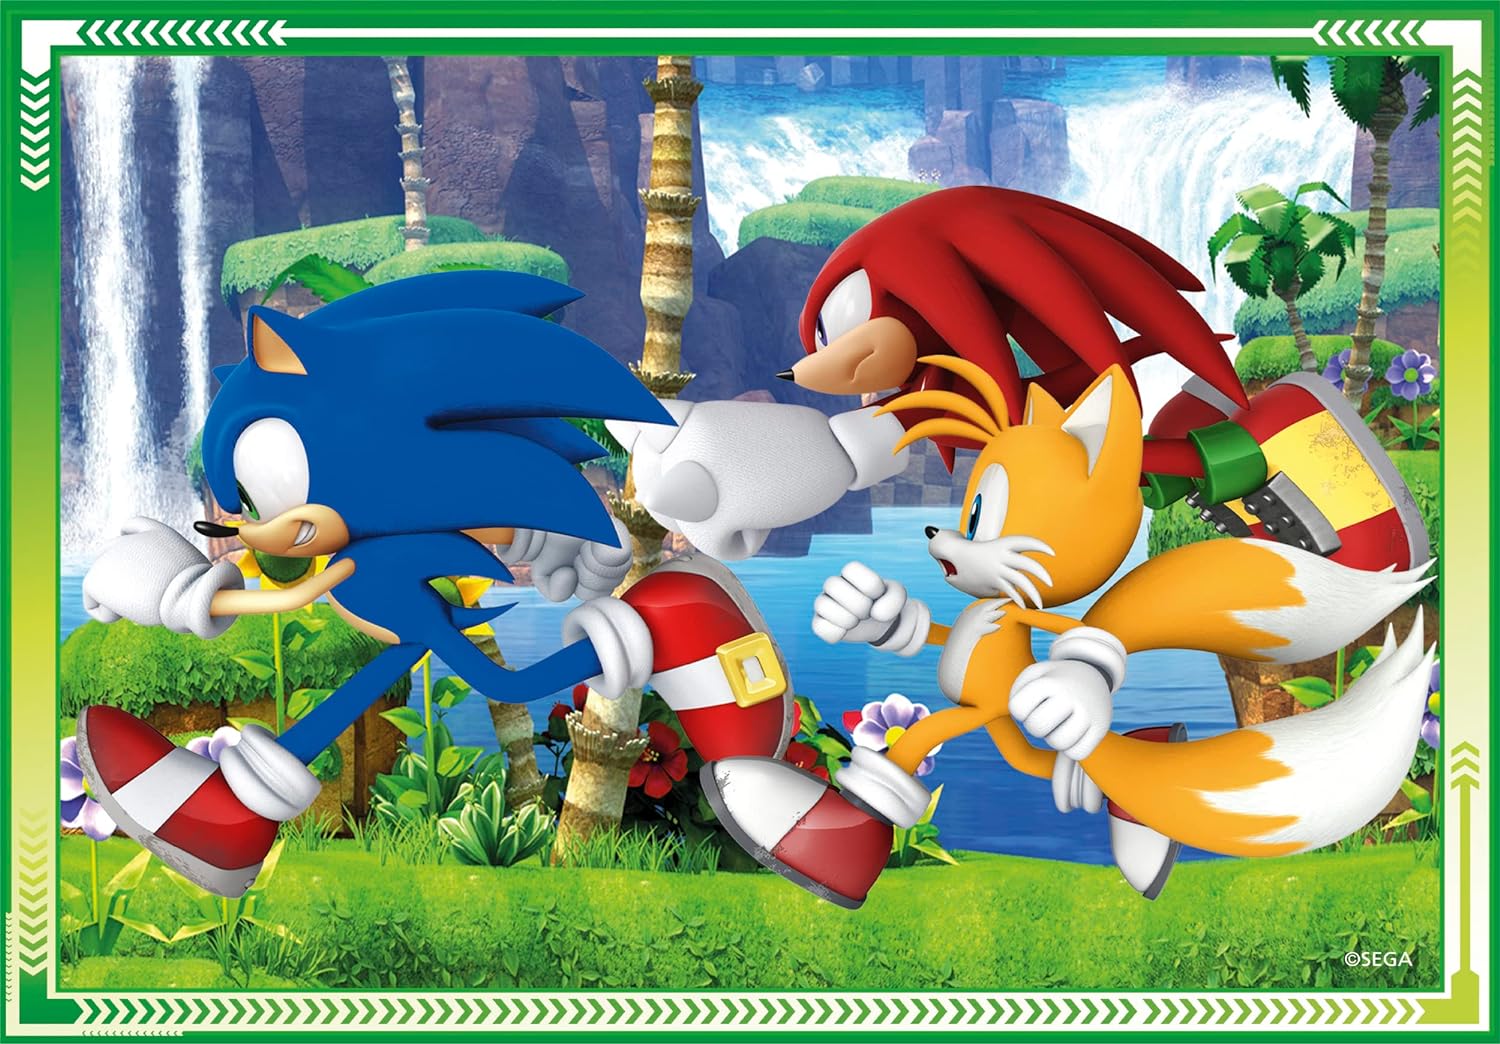 Clementoni Sonic the Hedgehog 4 in 1 Jigsaw Puzzle